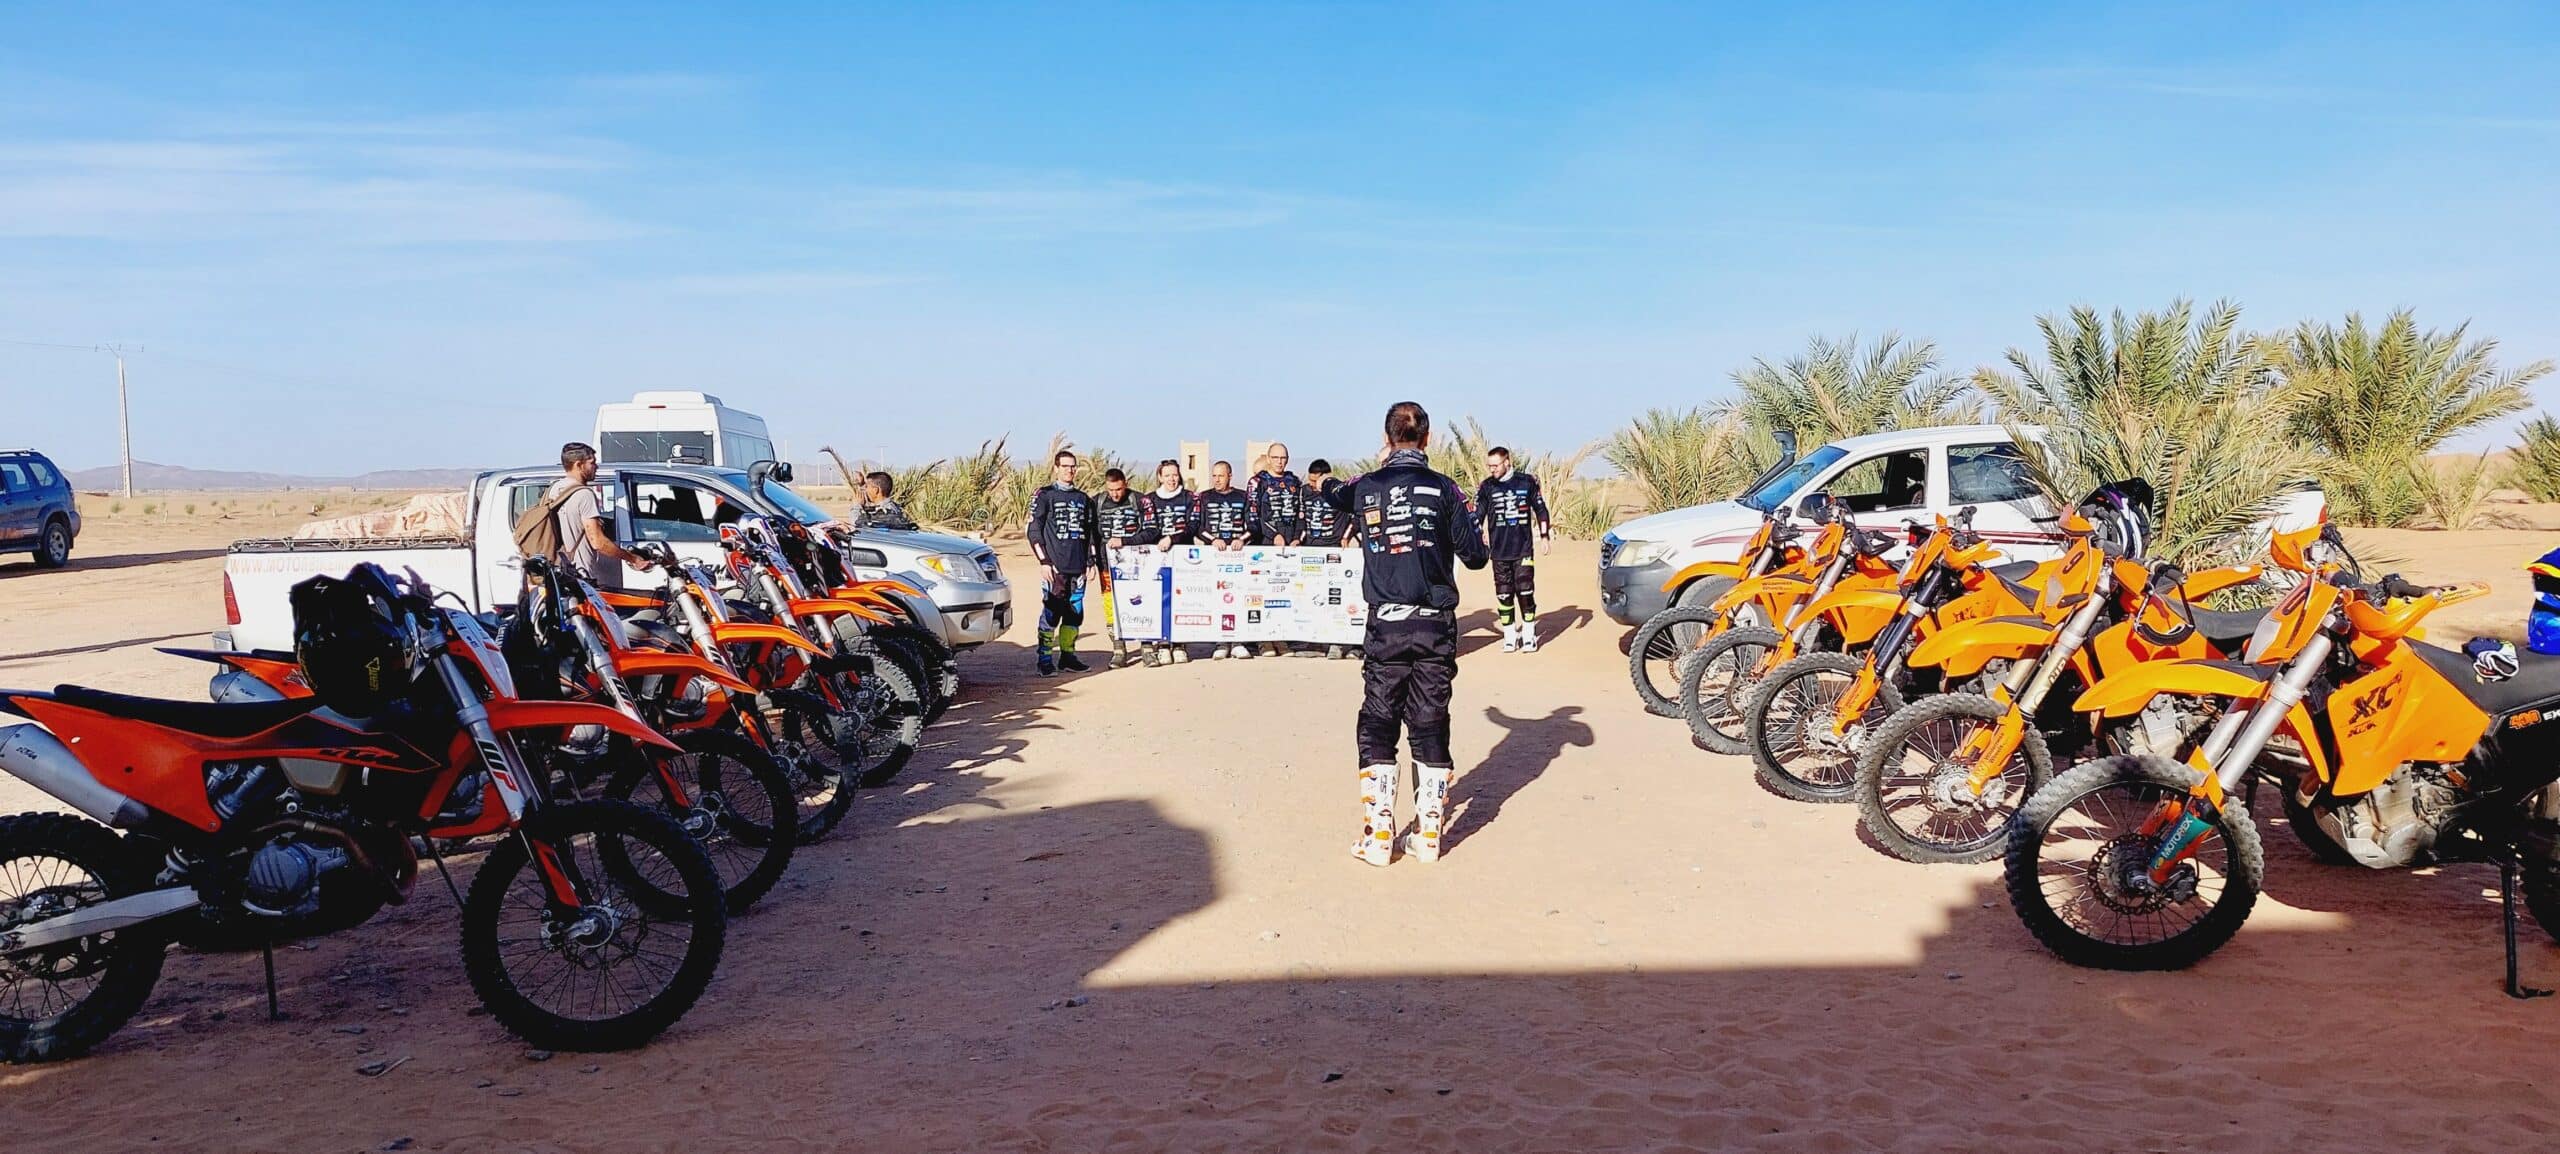 DISCOVER MOROCCO ON A KTM